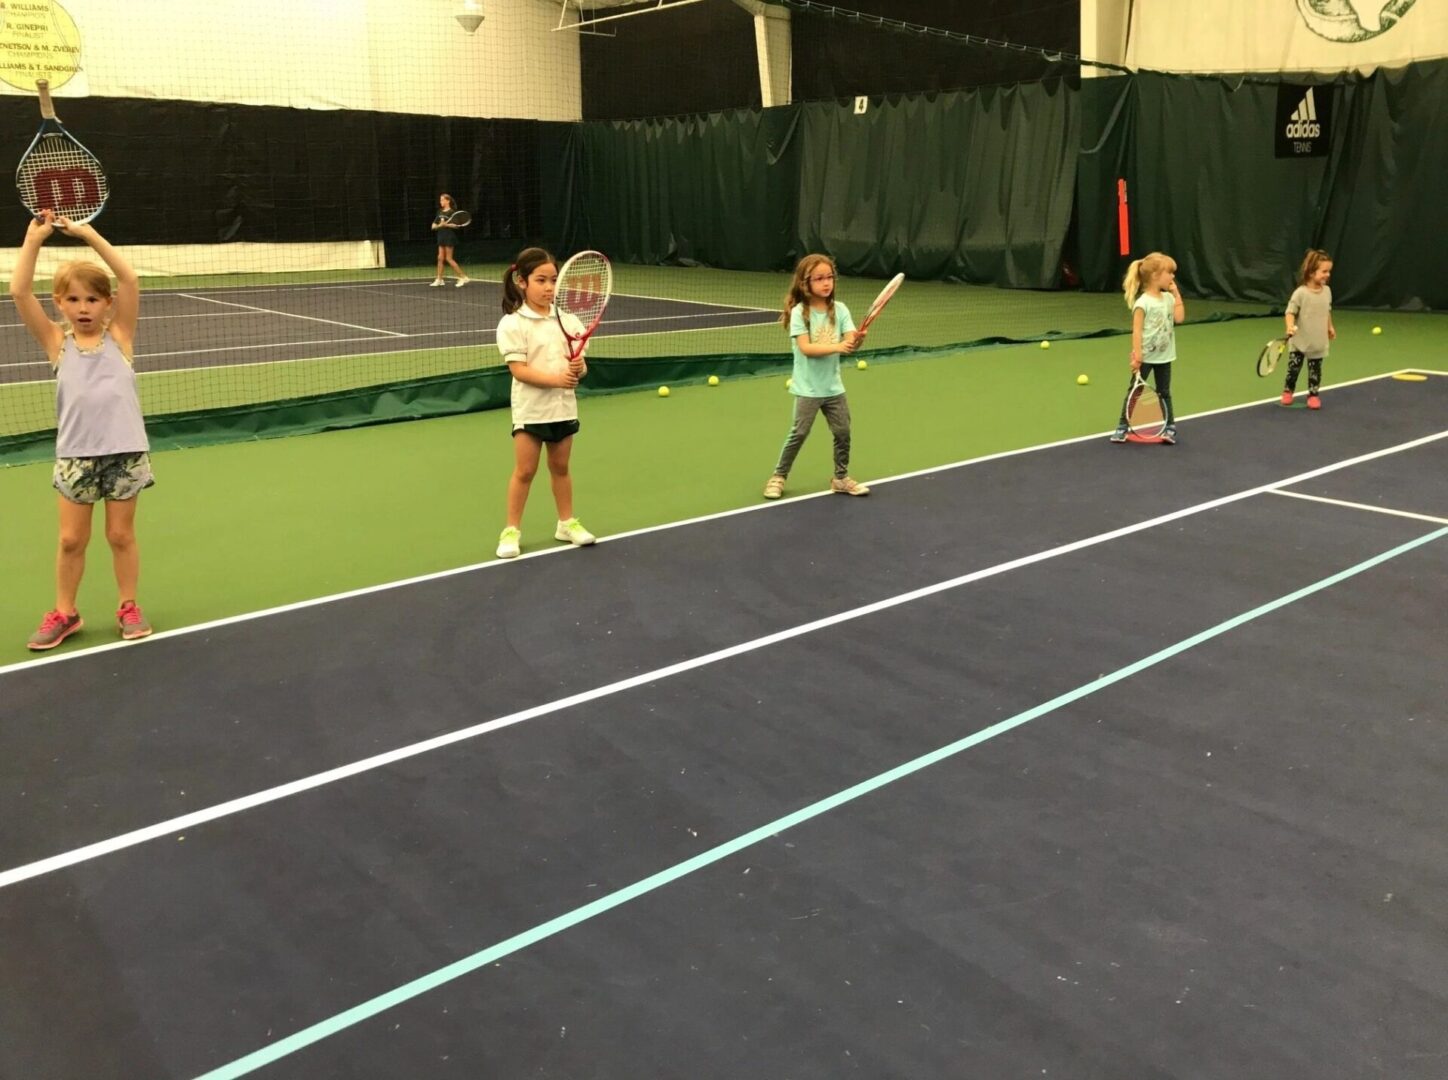 A group of children playing tennis on the court